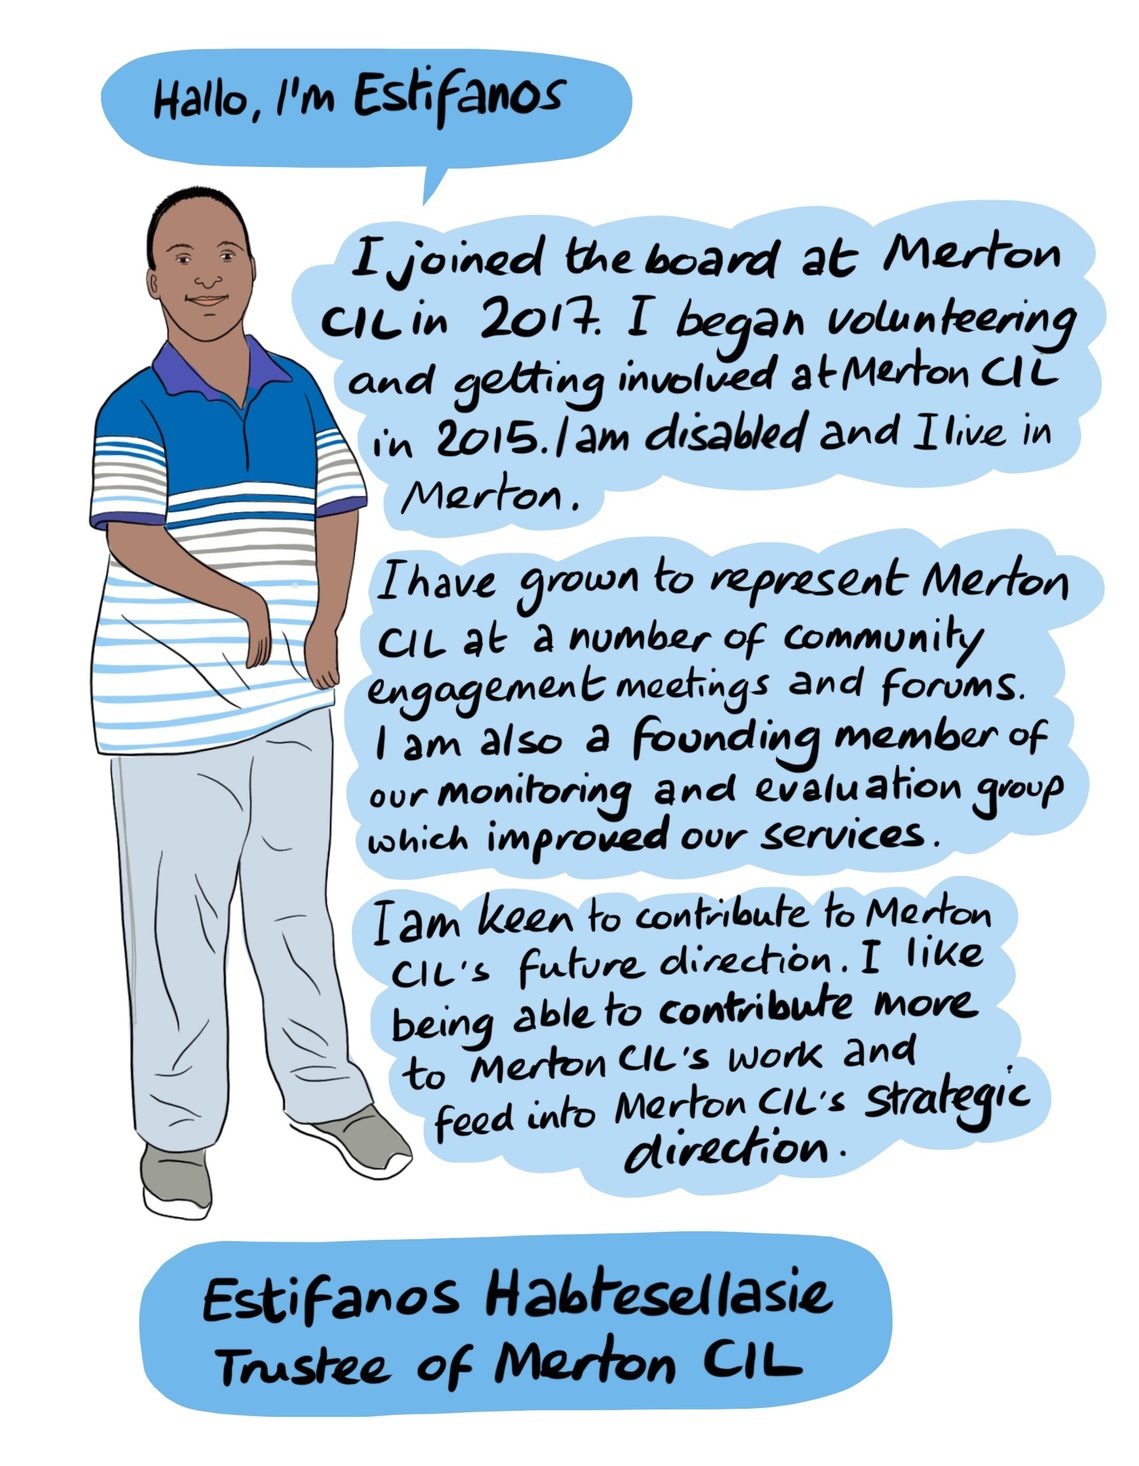 Estifanos - Estifanos began volunteering and getting involved at Merton CIL in 2015. He began initially doing administrative tasks and has since grown to represent Merton CIL at community engagement meetings and a number of other forums. Estifanos is also a founding member of Merton CIL’s monitoring and evaluation steering group, which aims to improve the services delivered by Merton CIL. He is keen to contribute to Merton CIL’s future direction.